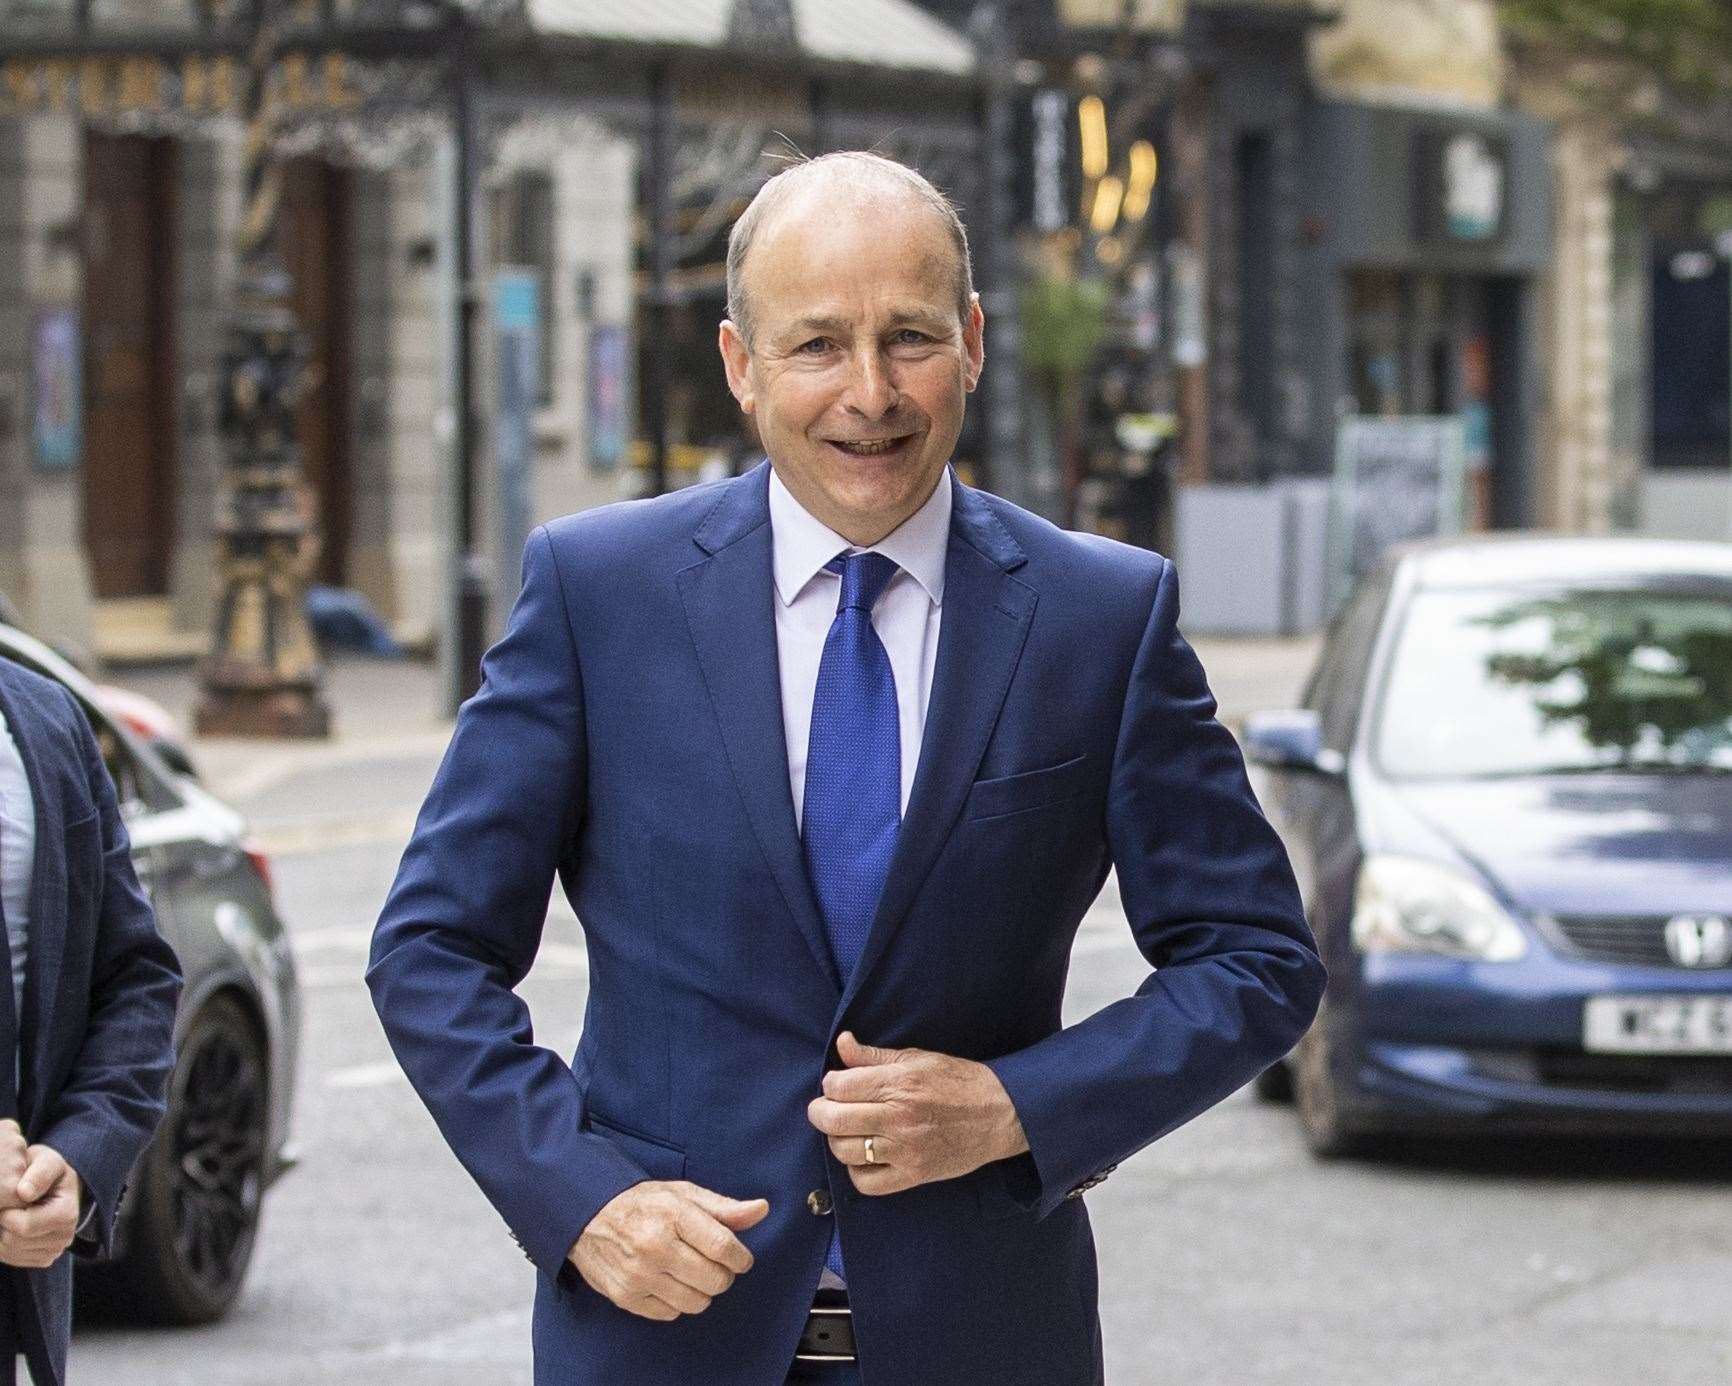 Tanaiste Micheal Martin arriving to the Grand Central Hotel in Belfast to speak to some of Stormont’s main political parties (Liam McBurney/PA)